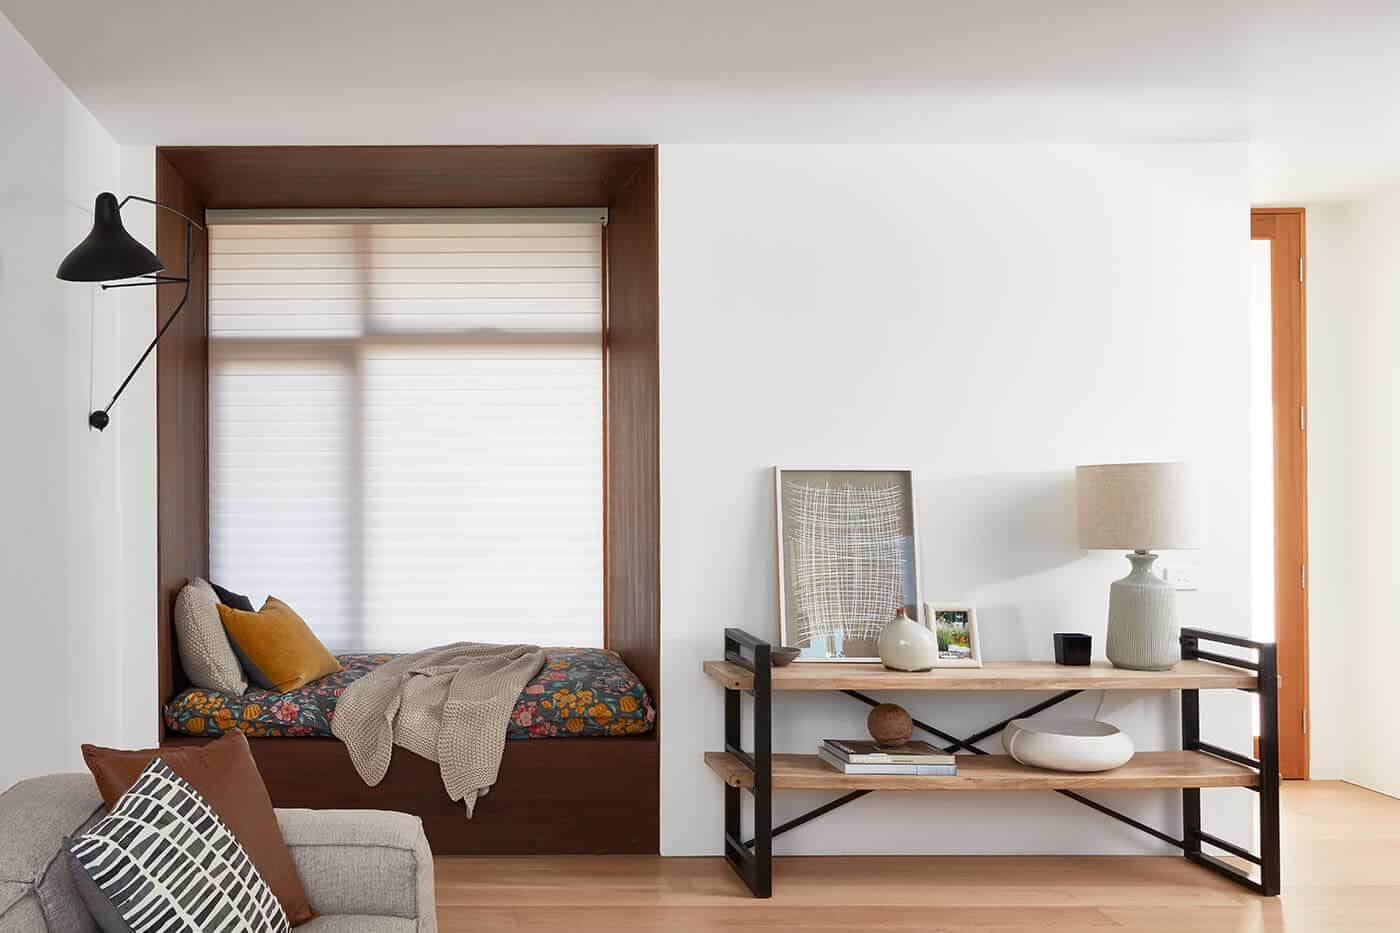 Cozy living room with wooden furniture and earthy tones, featuring Luxaflex Silhouette Shades by the window diffusing natural day light while offering UV protection. Available in Complete Blinds Sydney.